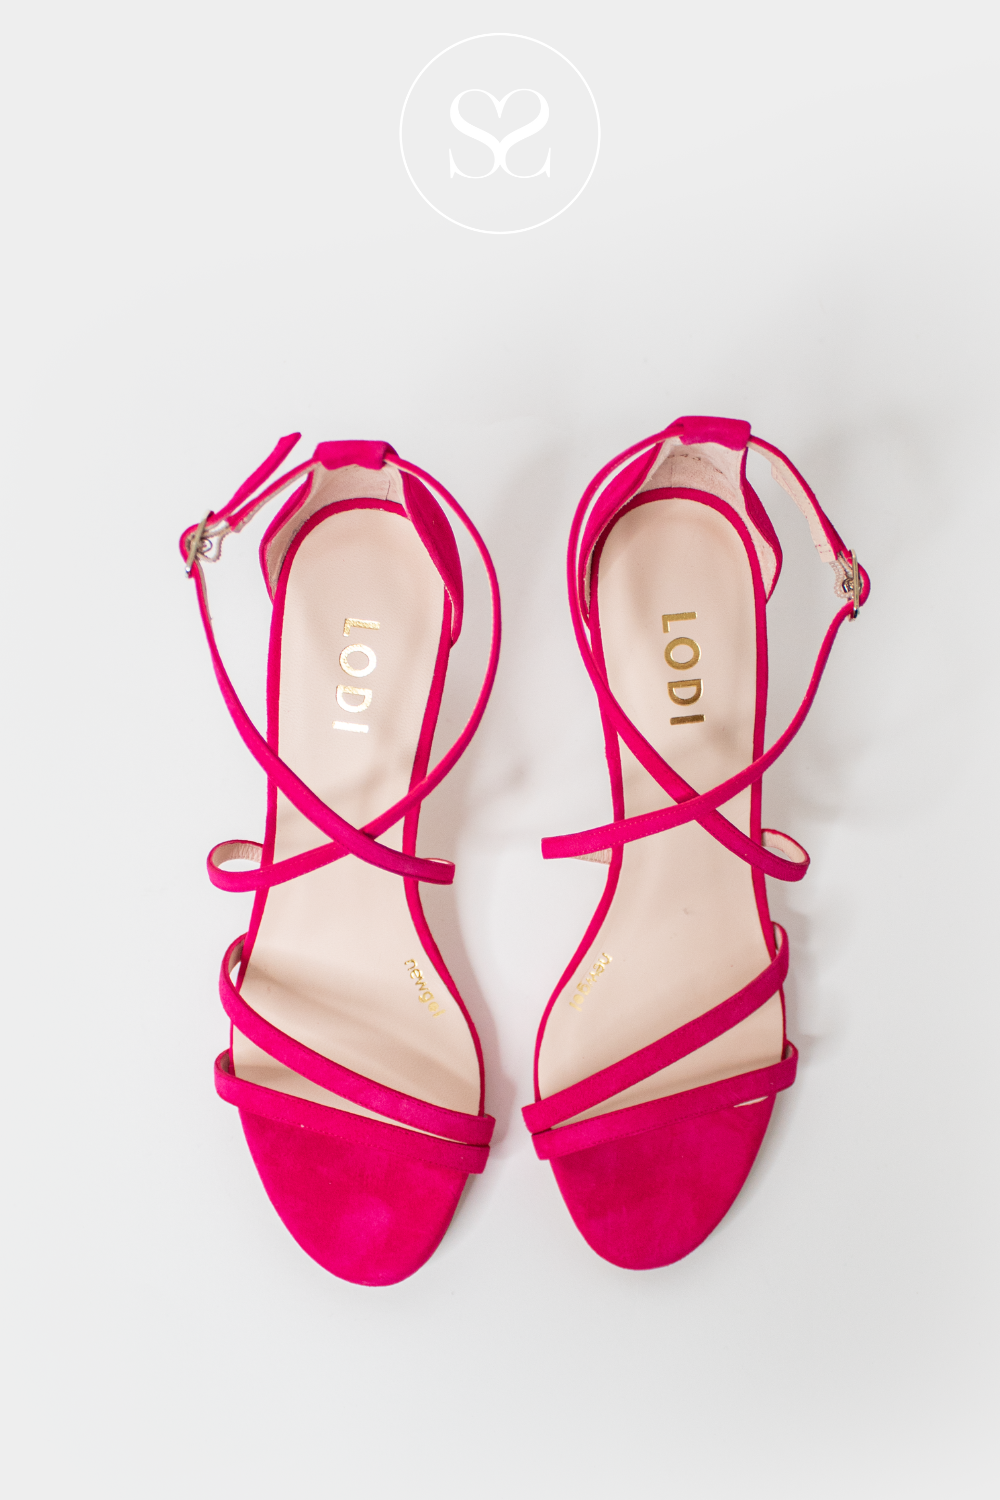 LODI INRIKO PINK SUEDE STRAPPY HIGH HEEL SANDAL WITH CRISS CROSS STRAPS AND ADJUSTABLE BUCKLE